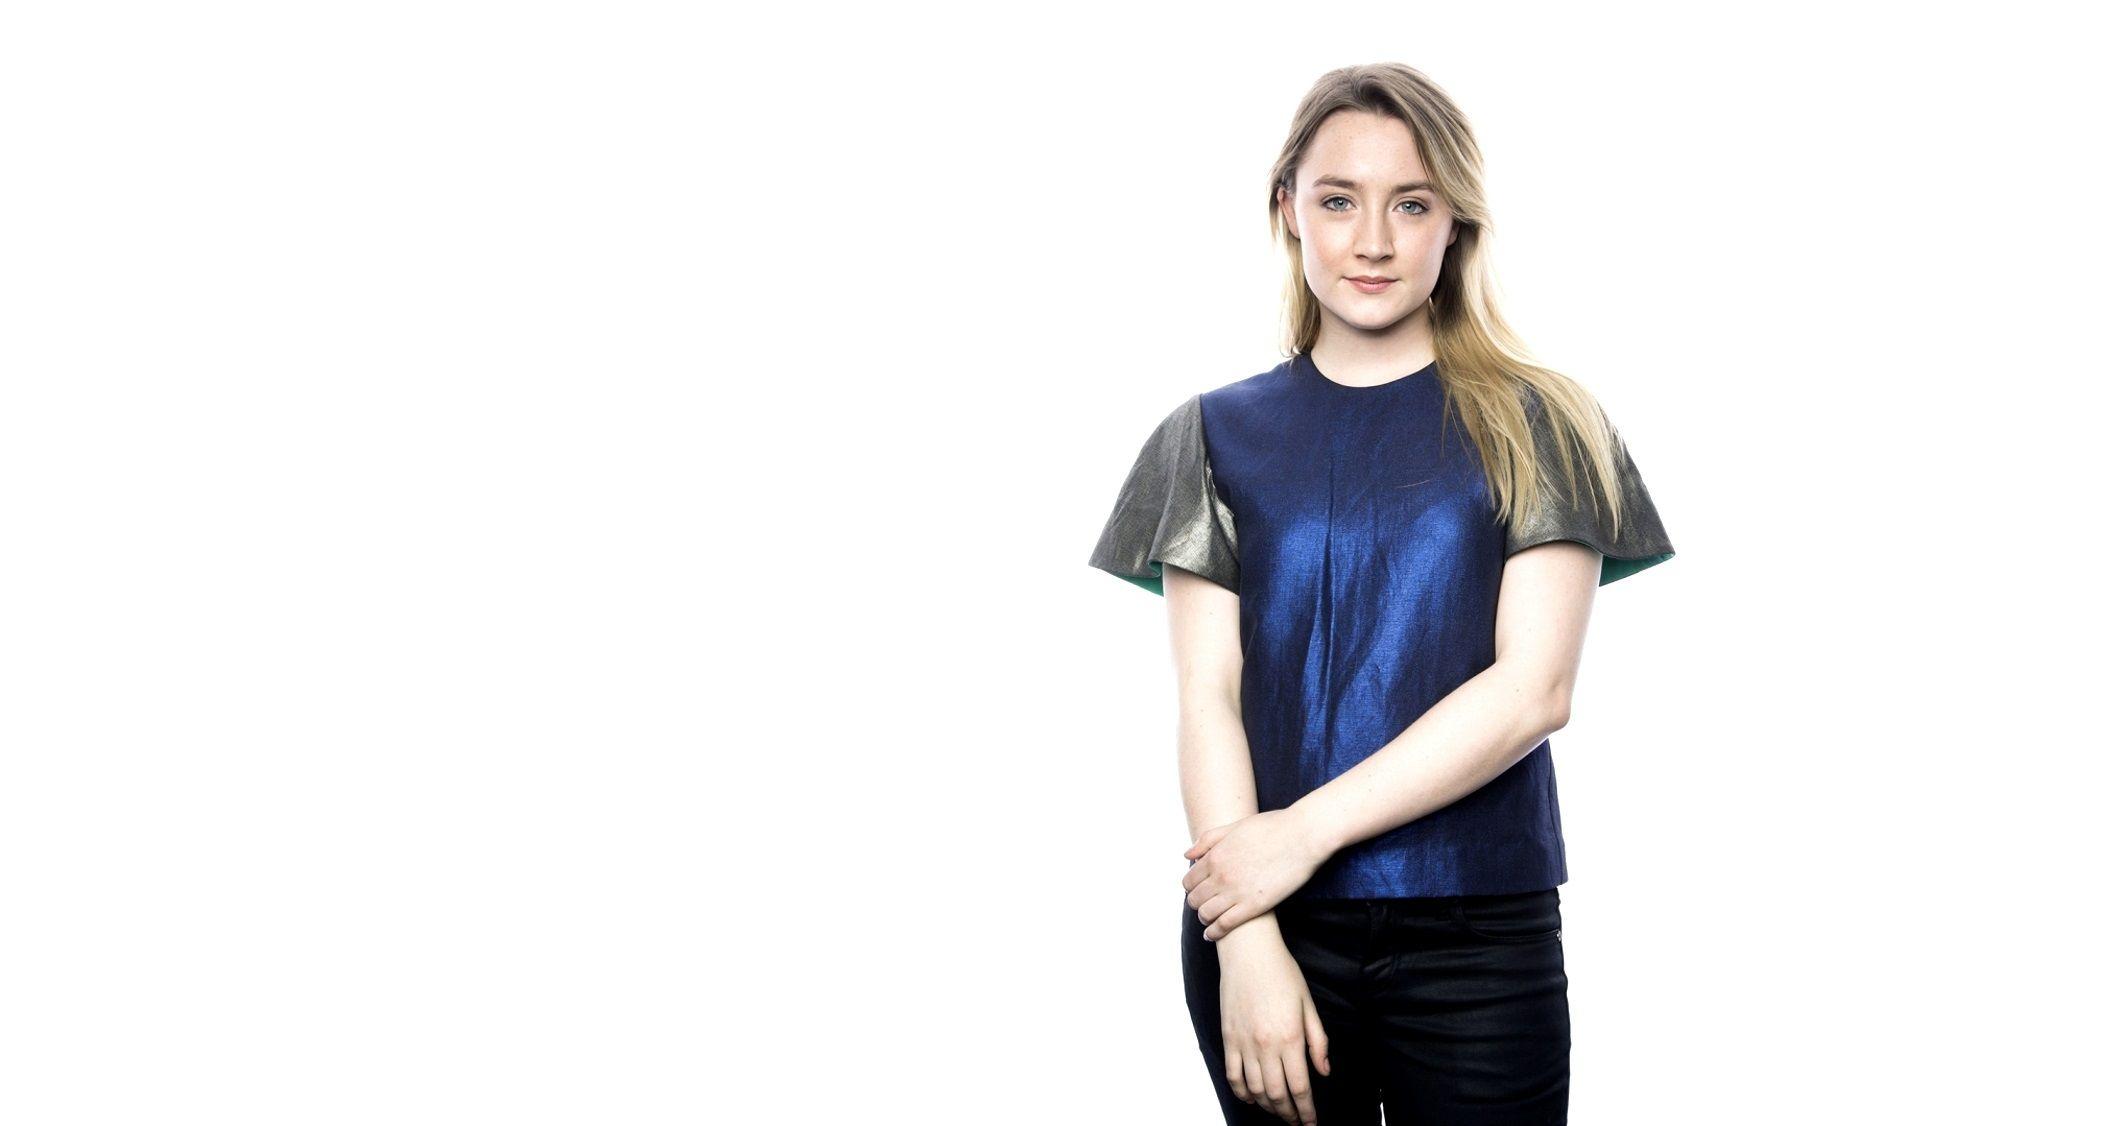 Saoirse Ronan Wallpaper Image Photo Picture Background